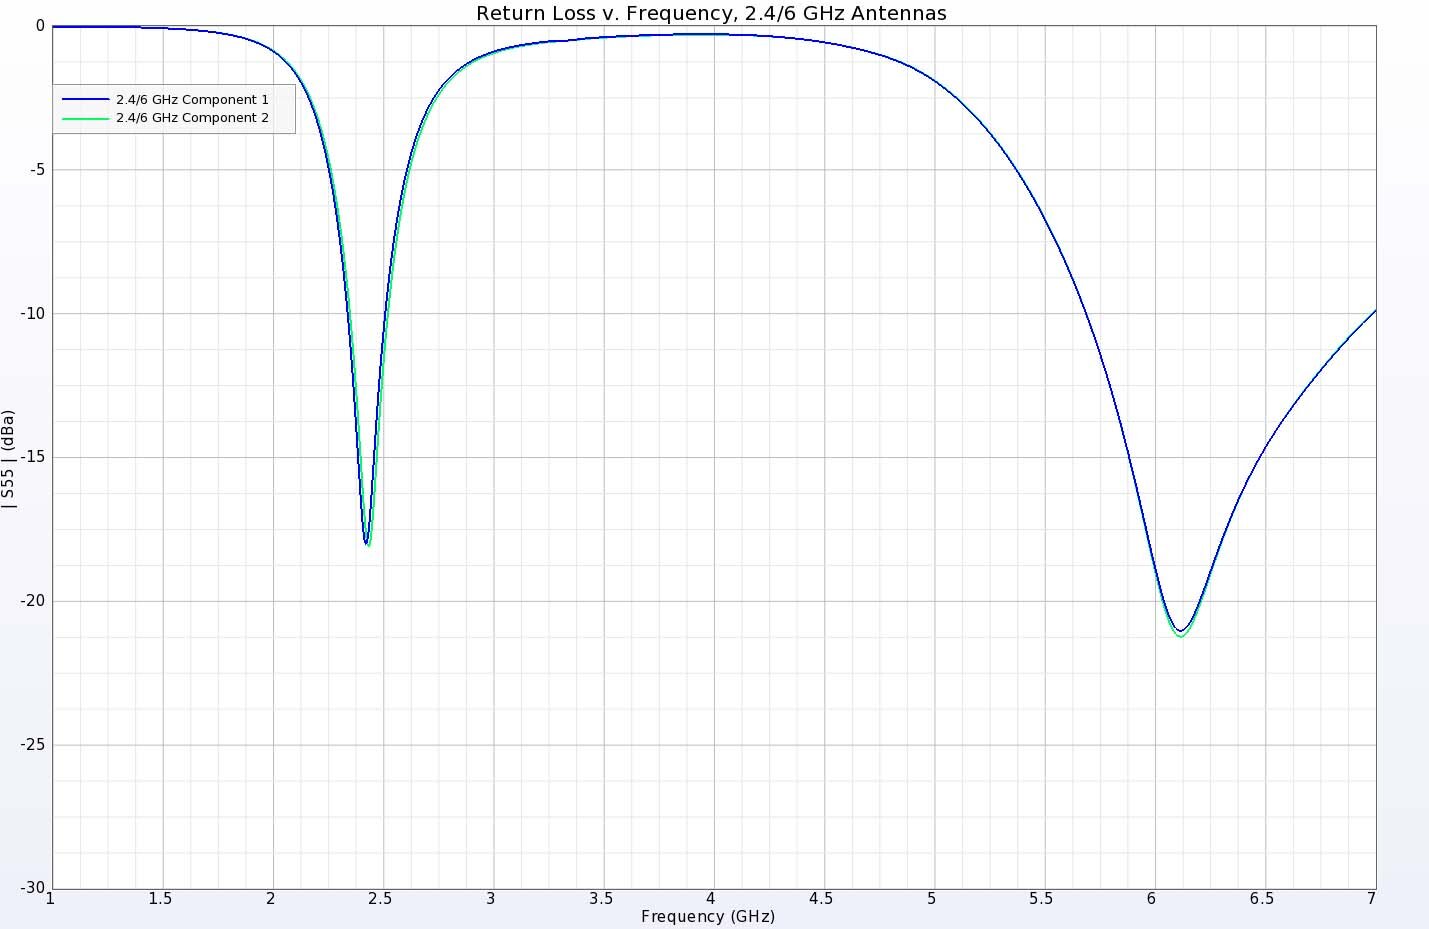 Figure 4: The return loss for the 2.4/6-7 GHz antenna elements shows values below -10 dB at the desired frequency bands.